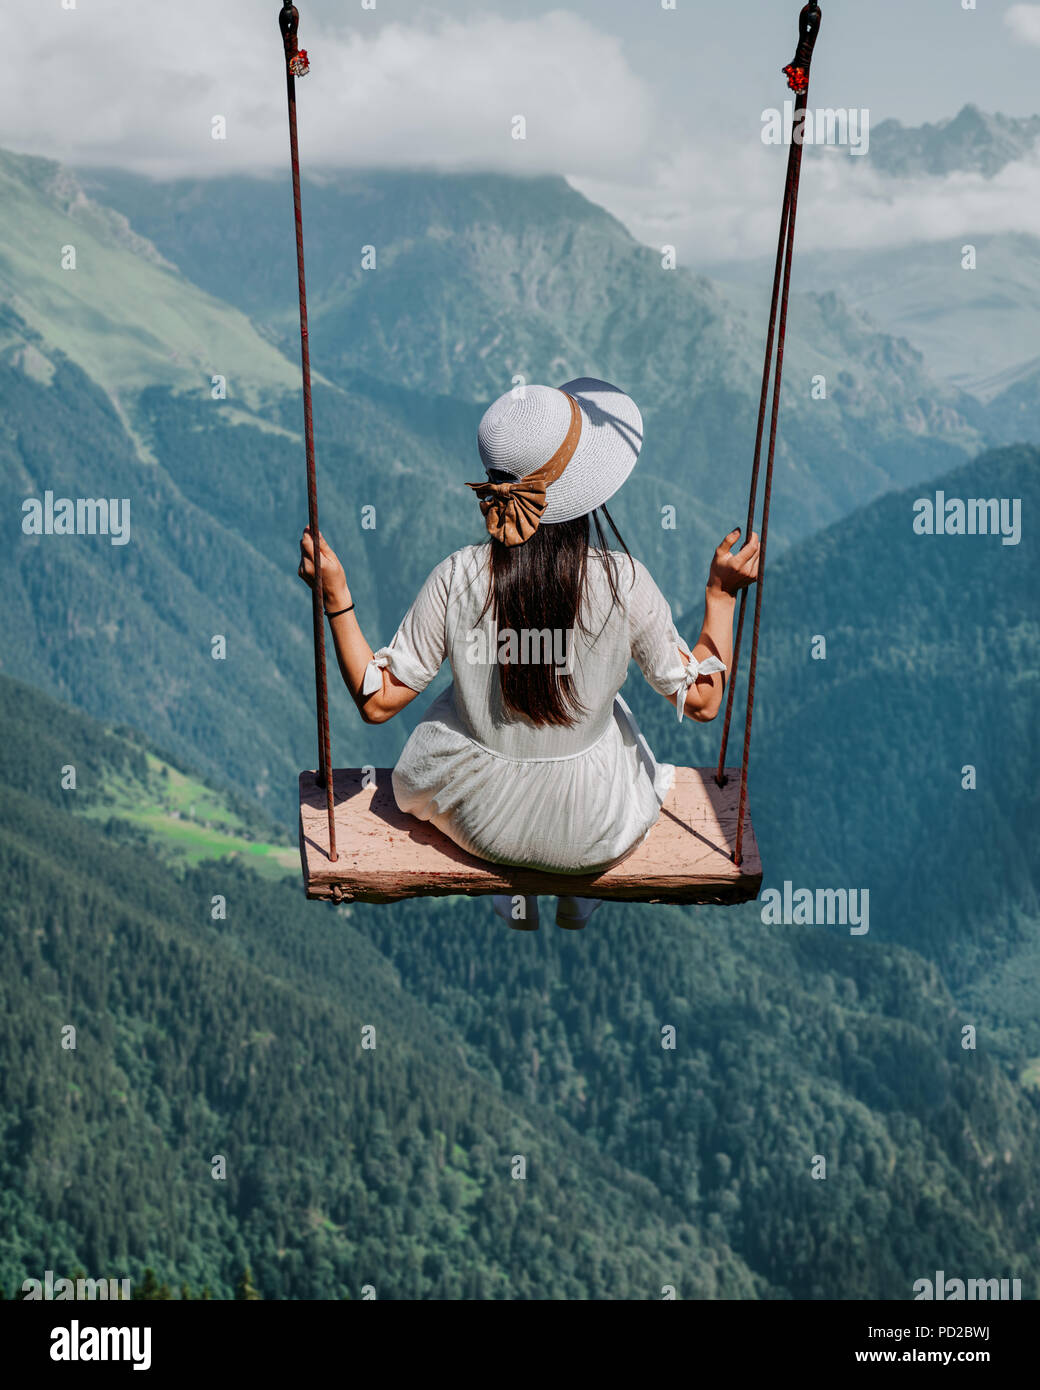 Freedom and carefree of a young female on a swing. Stock Photo